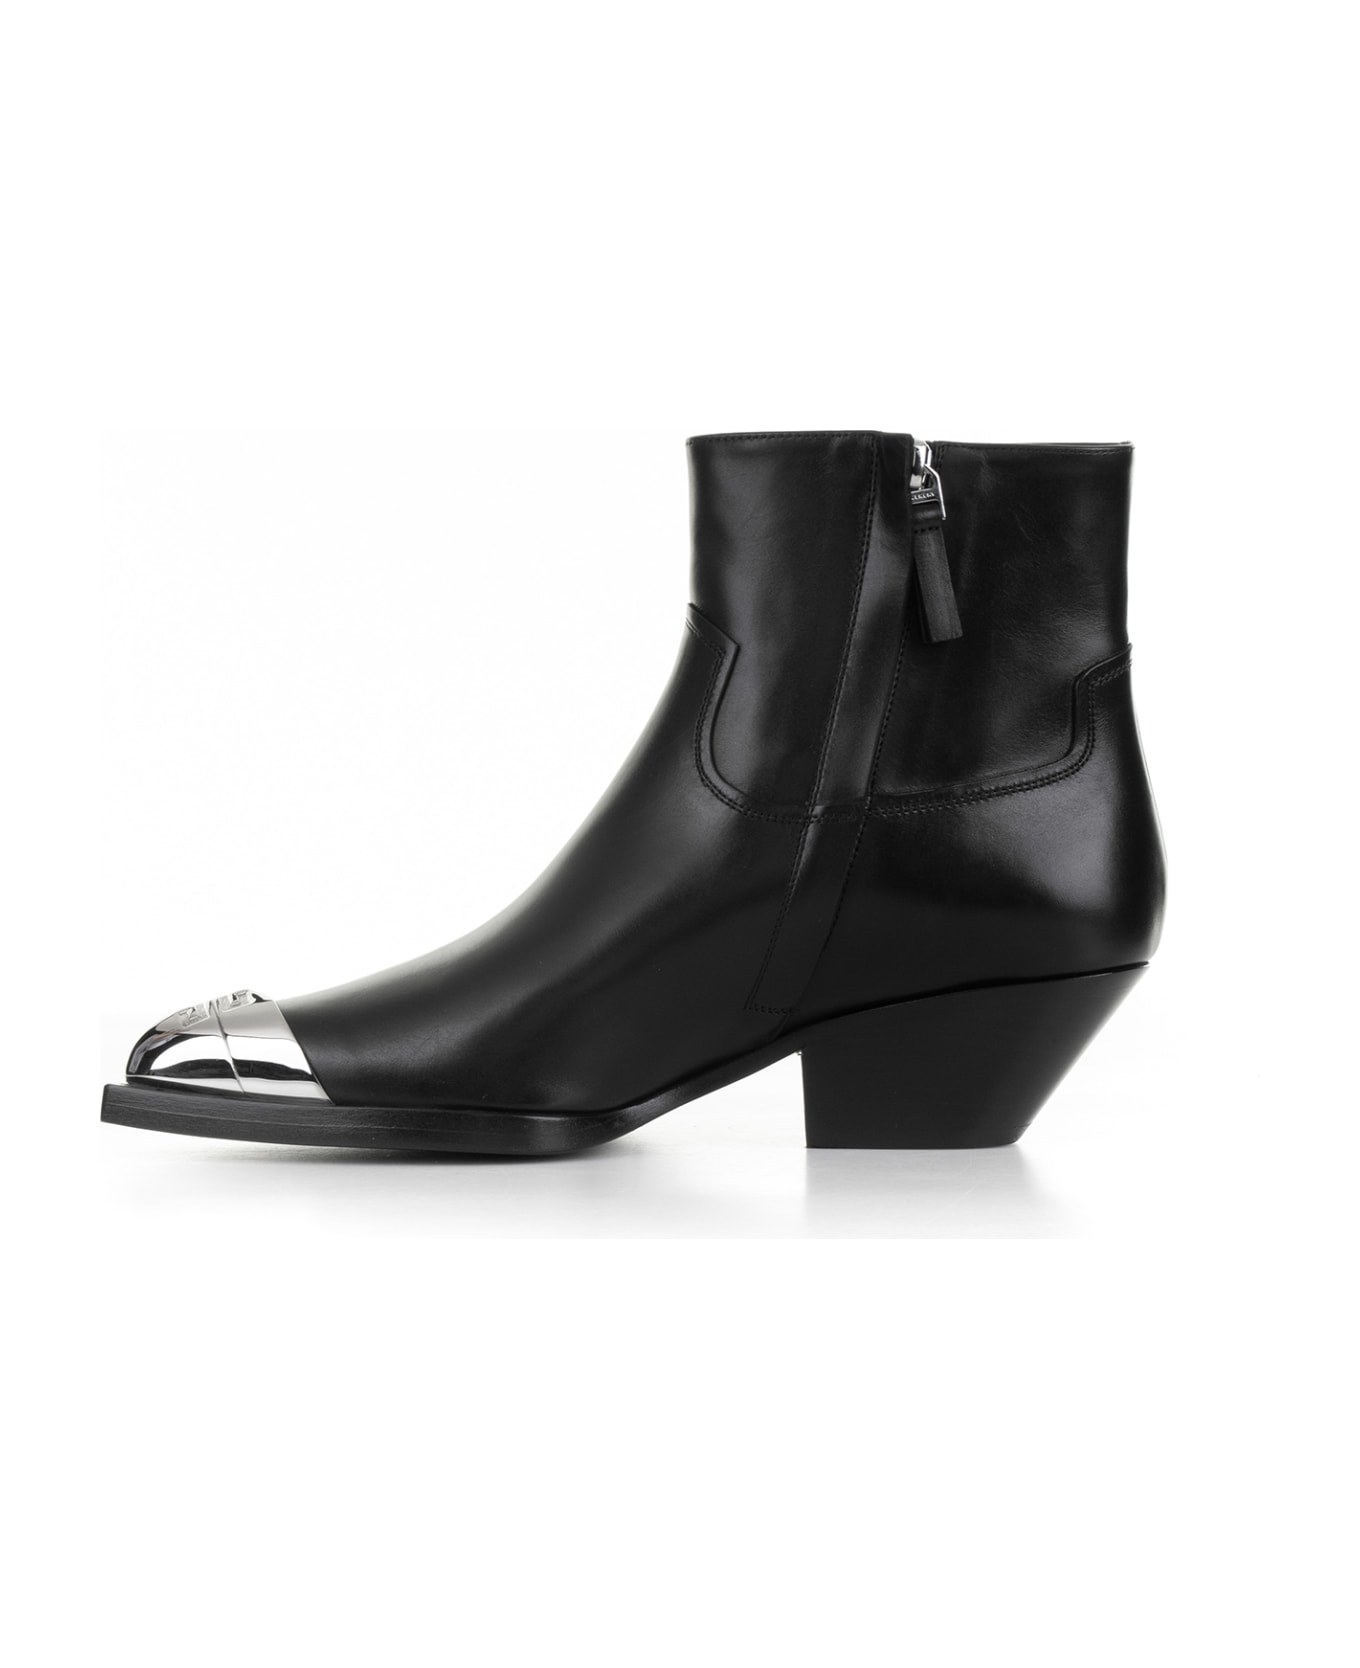 Givenchy Ankle Boots - NERO ブーツ